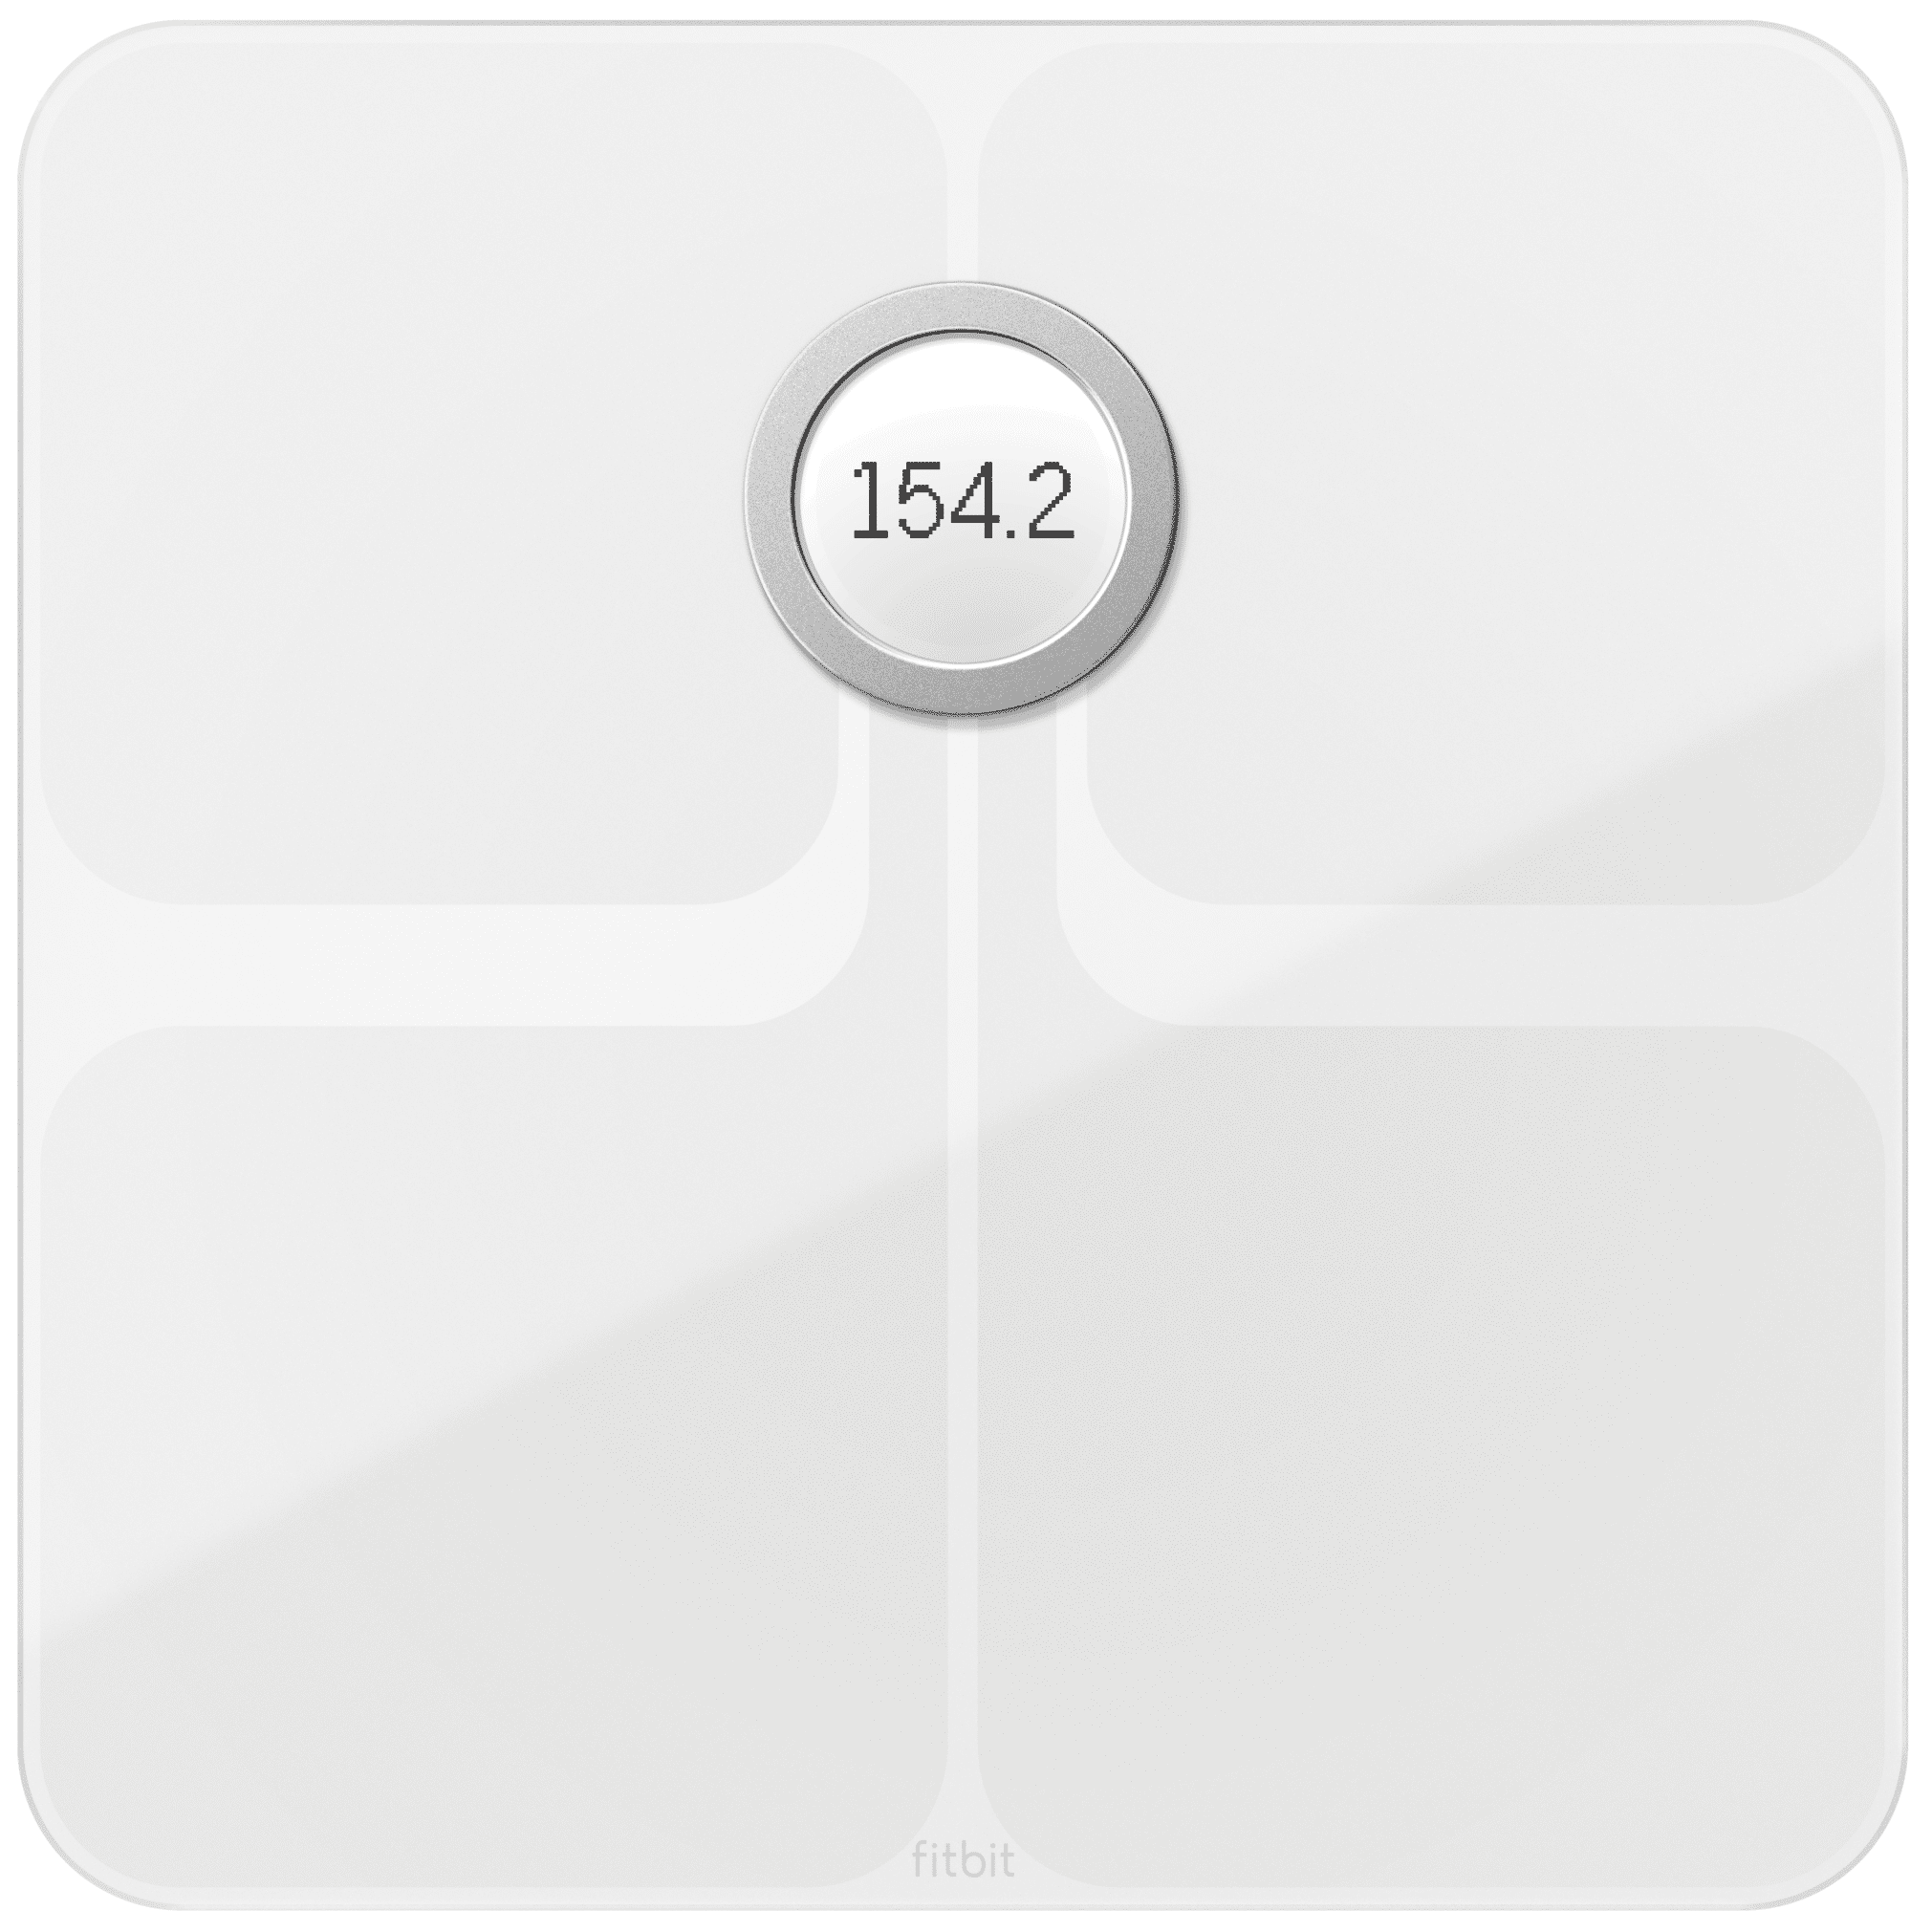 Fitbit Aria WiFi Smart Bathroom Fitness Scale FB201W White - Water  Resistance - Scales